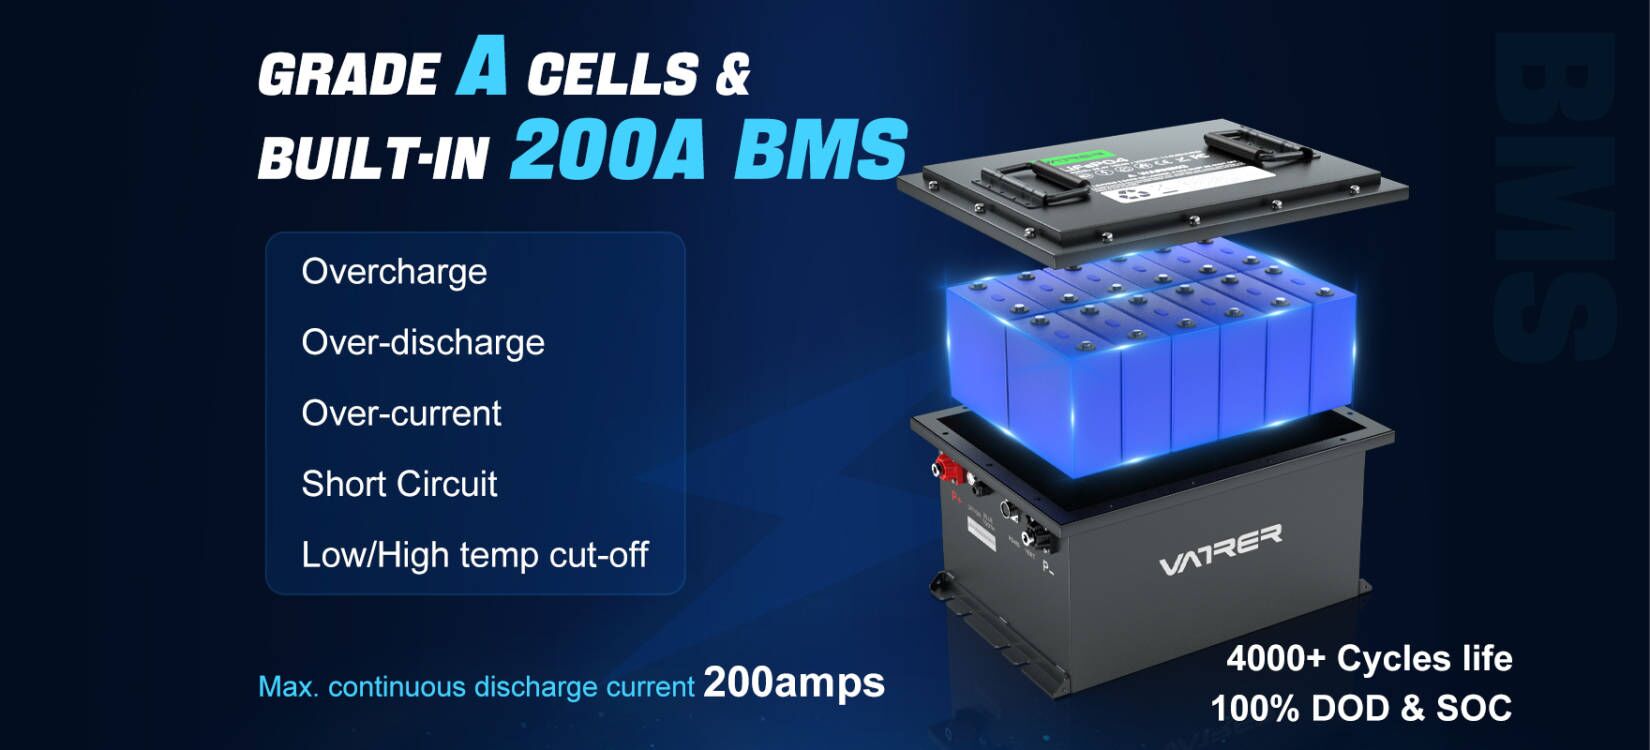 High-grade A Cells and Built-in 200A BMS